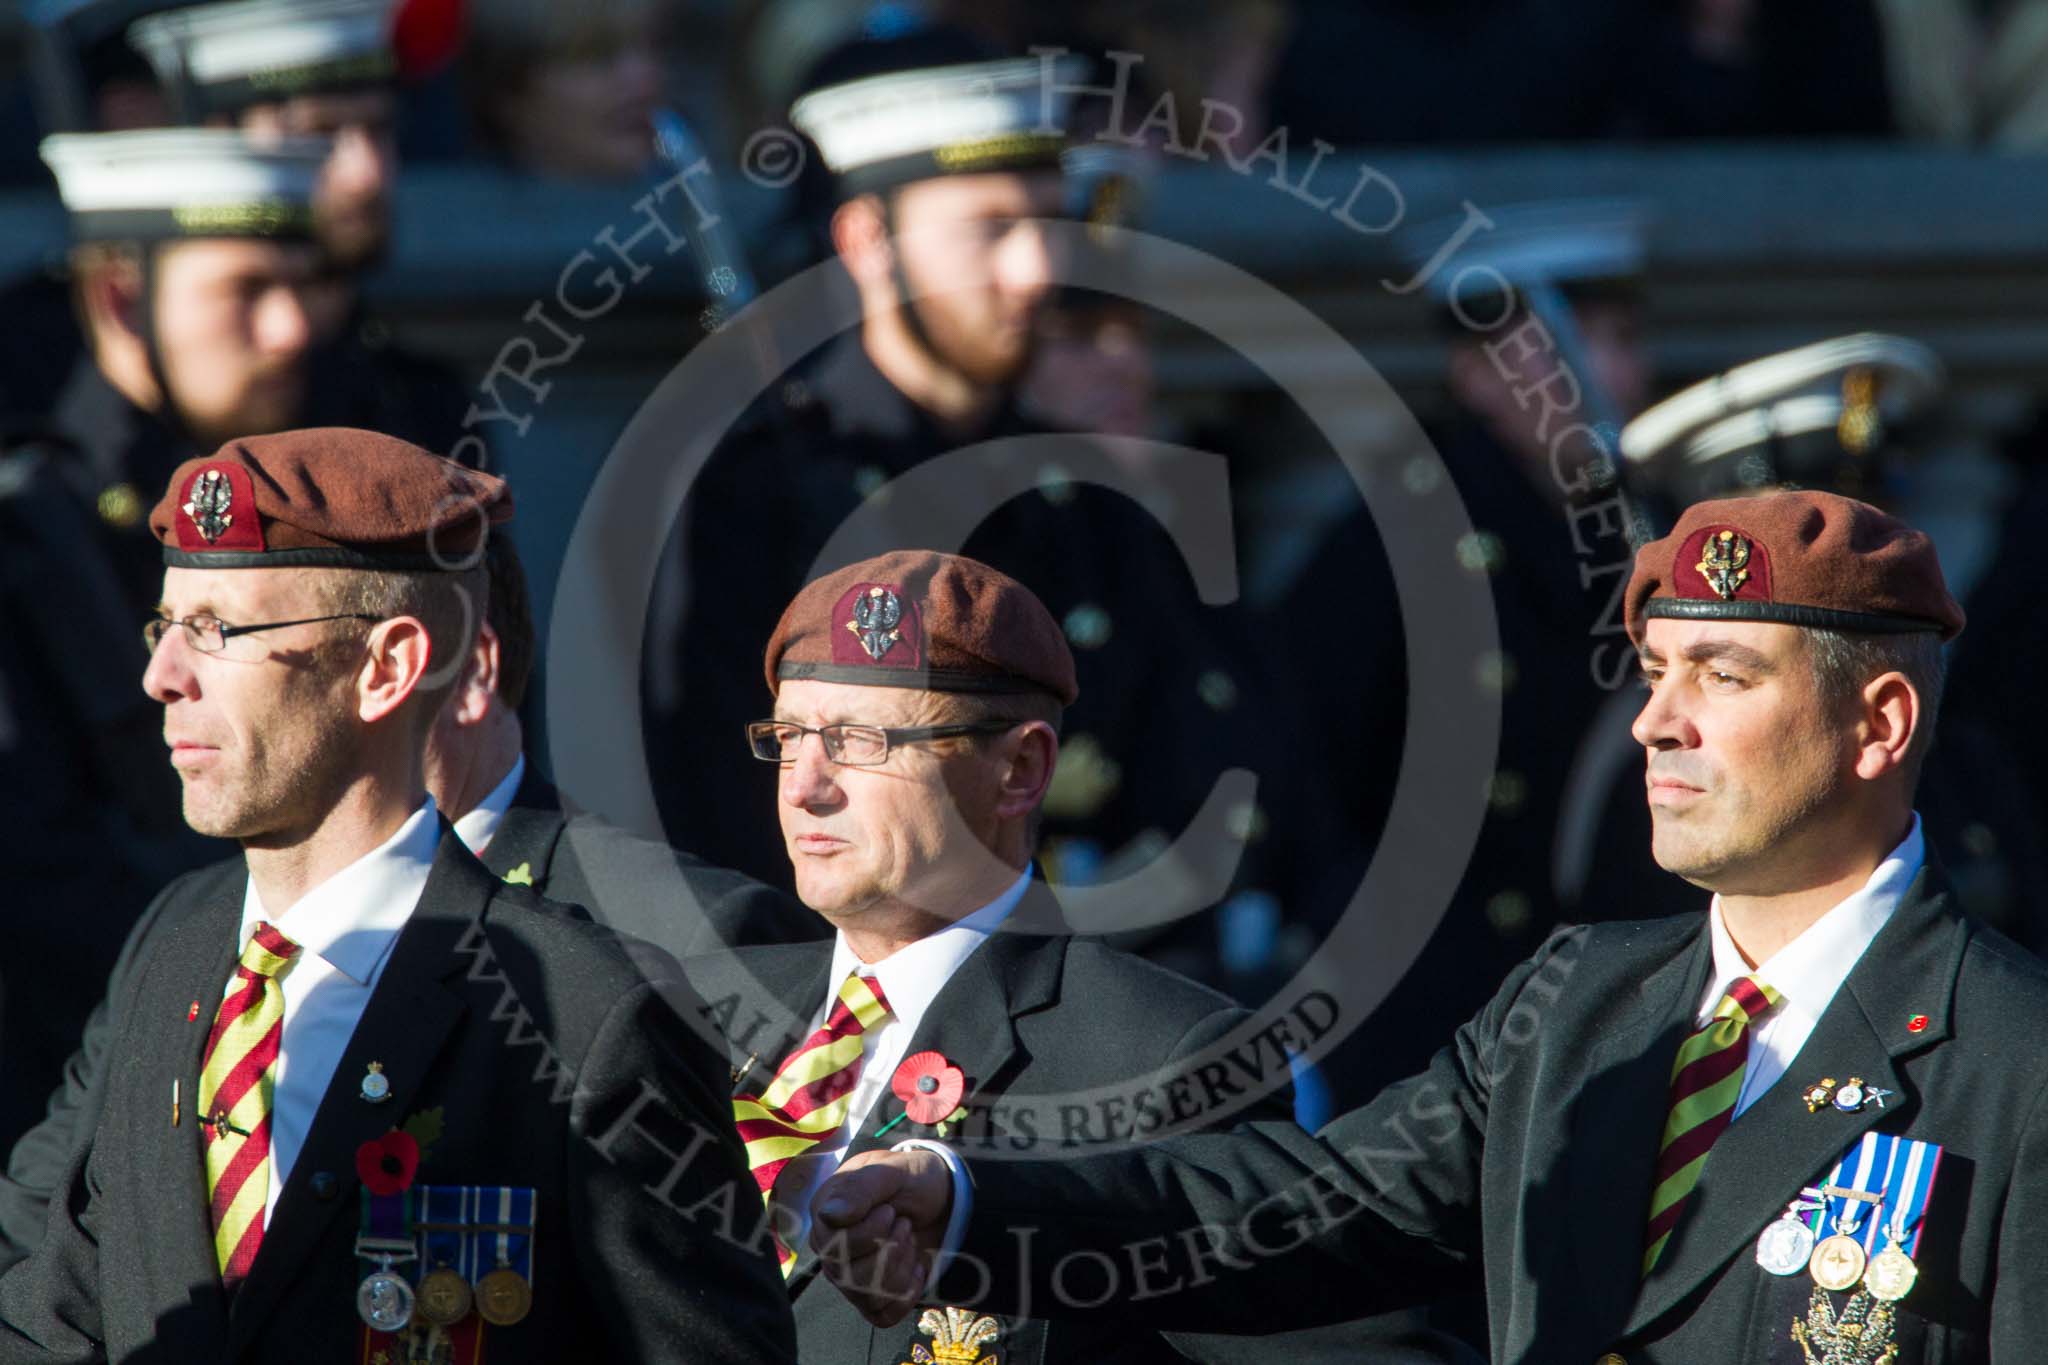 Remembrance Sunday at the Cenotaph in London 2014: Group B29 - Queen's Royal Hussars (The Queen's Own & Royal Irish).
Press stand opposite the Foreign Office building, Whitehall, London SW1,
London,
Greater London,
United Kingdom,
on 09 November 2014 at 12:12, image #1859